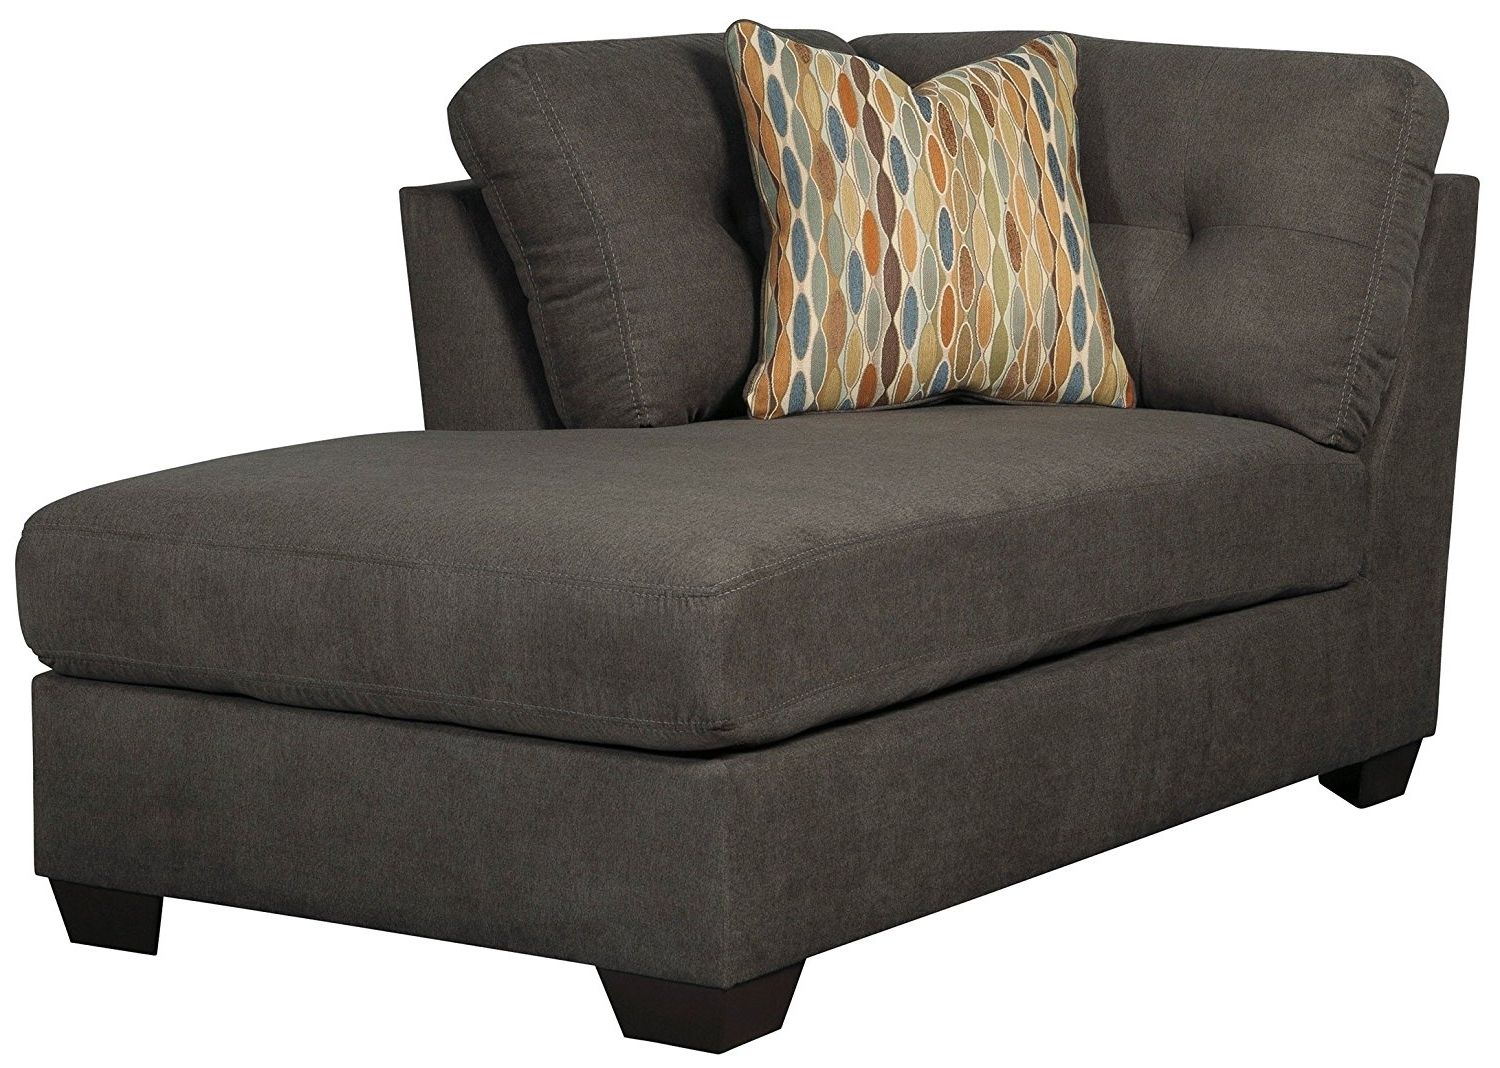 Favorite Amazon: Ashley Furniture Delta City Right Corner Chaise Lounge With Regard To Ashley Furniture Chaise Lounges (View 2 of 15)